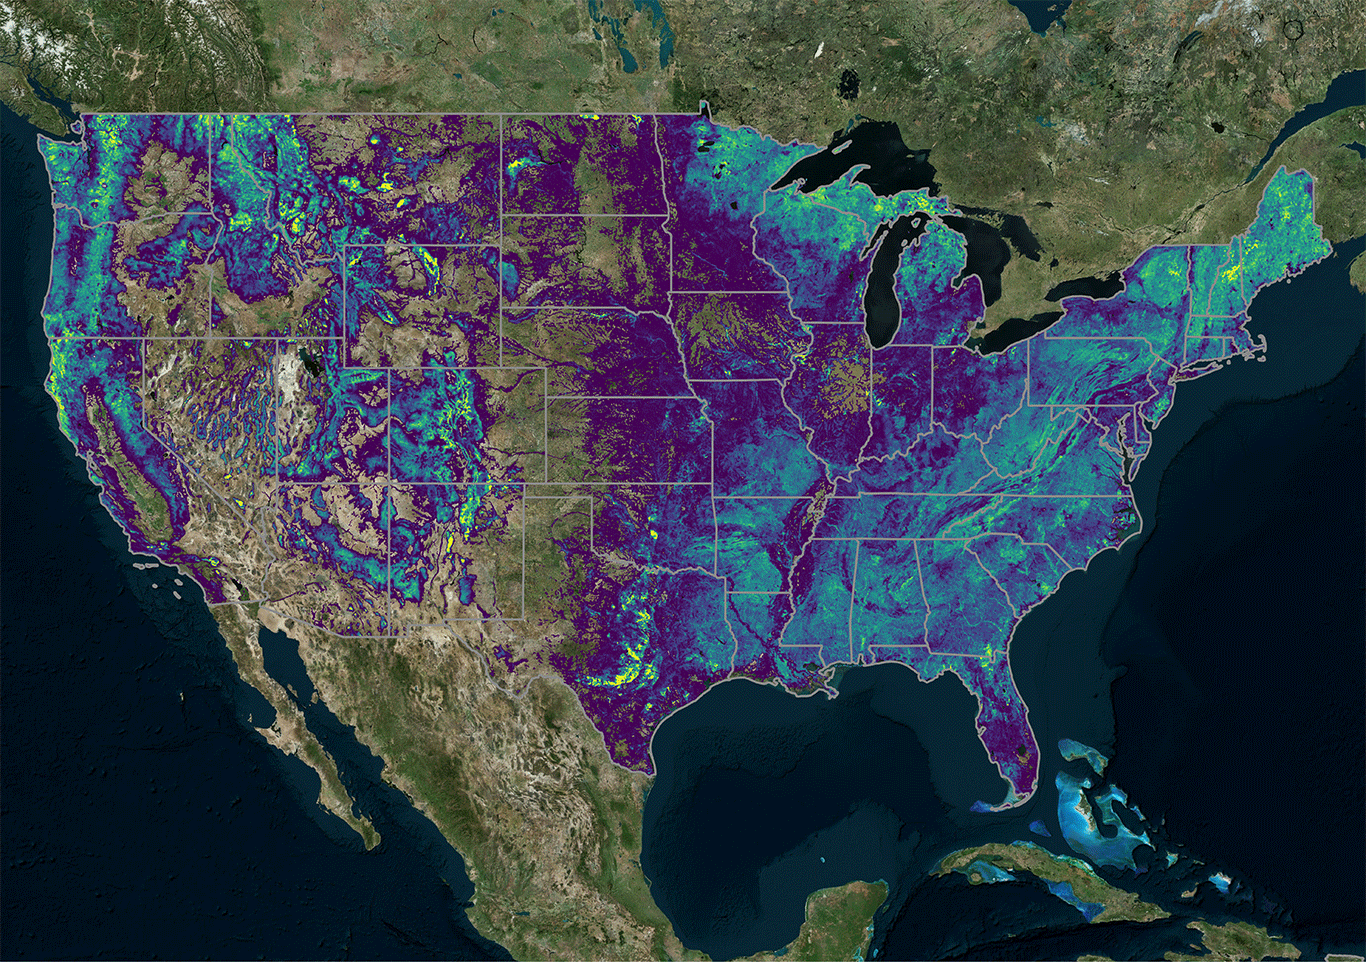 A forest map of the contiguous United States showing every tree precisely mapped by NCX Basemap